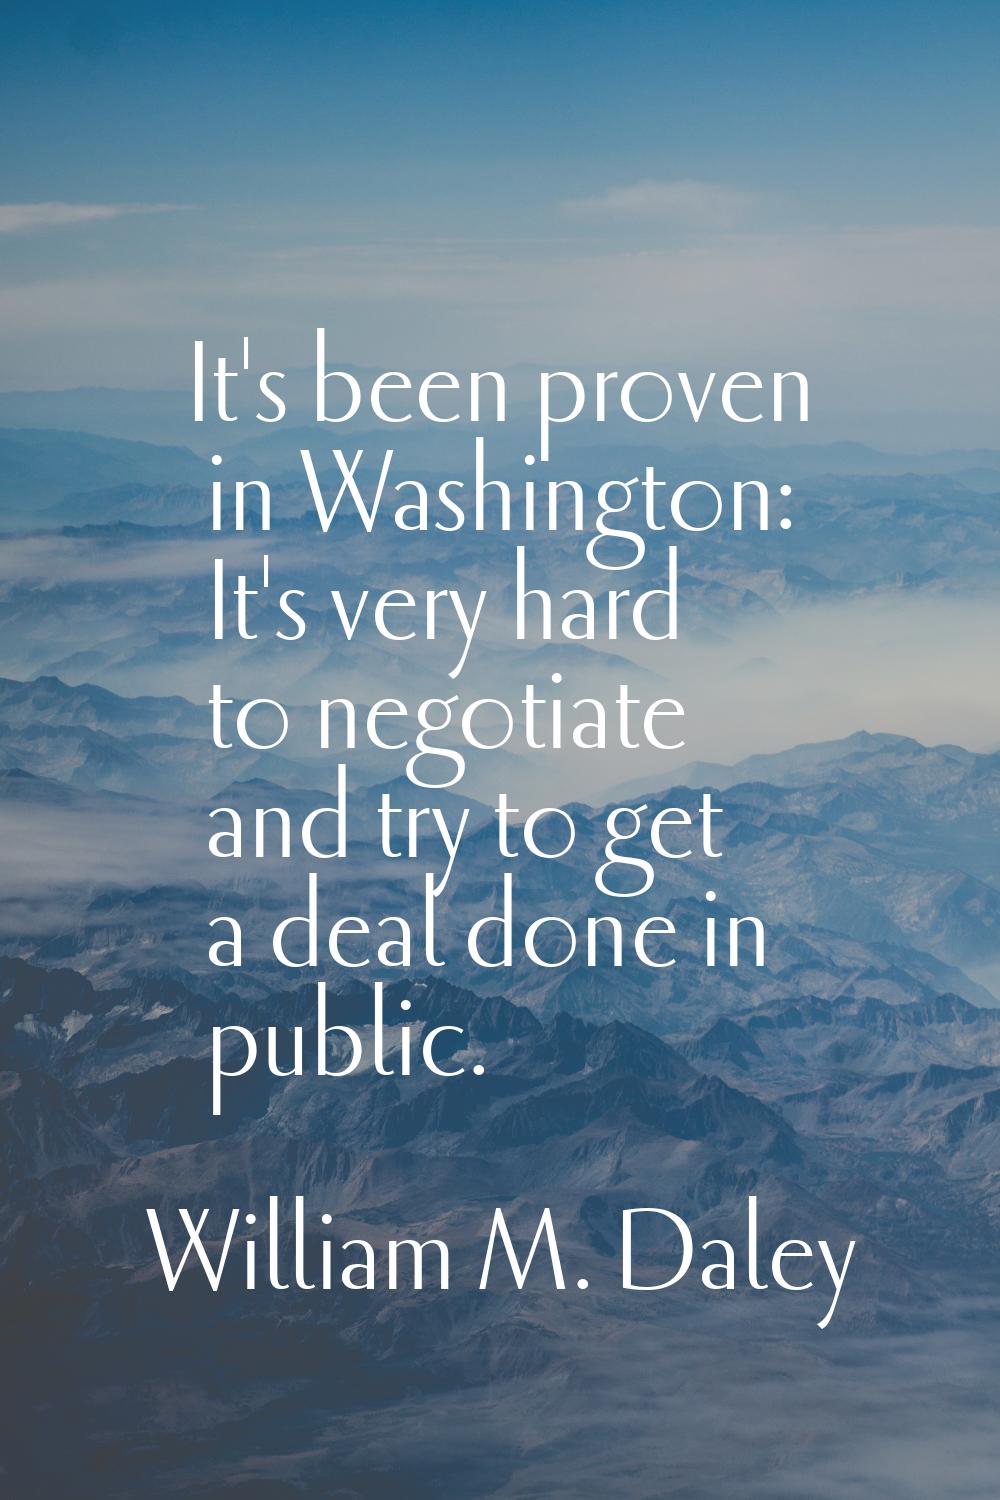 It's been proven in Washington: It's very hard to negotiate and try to get a deal done in public.